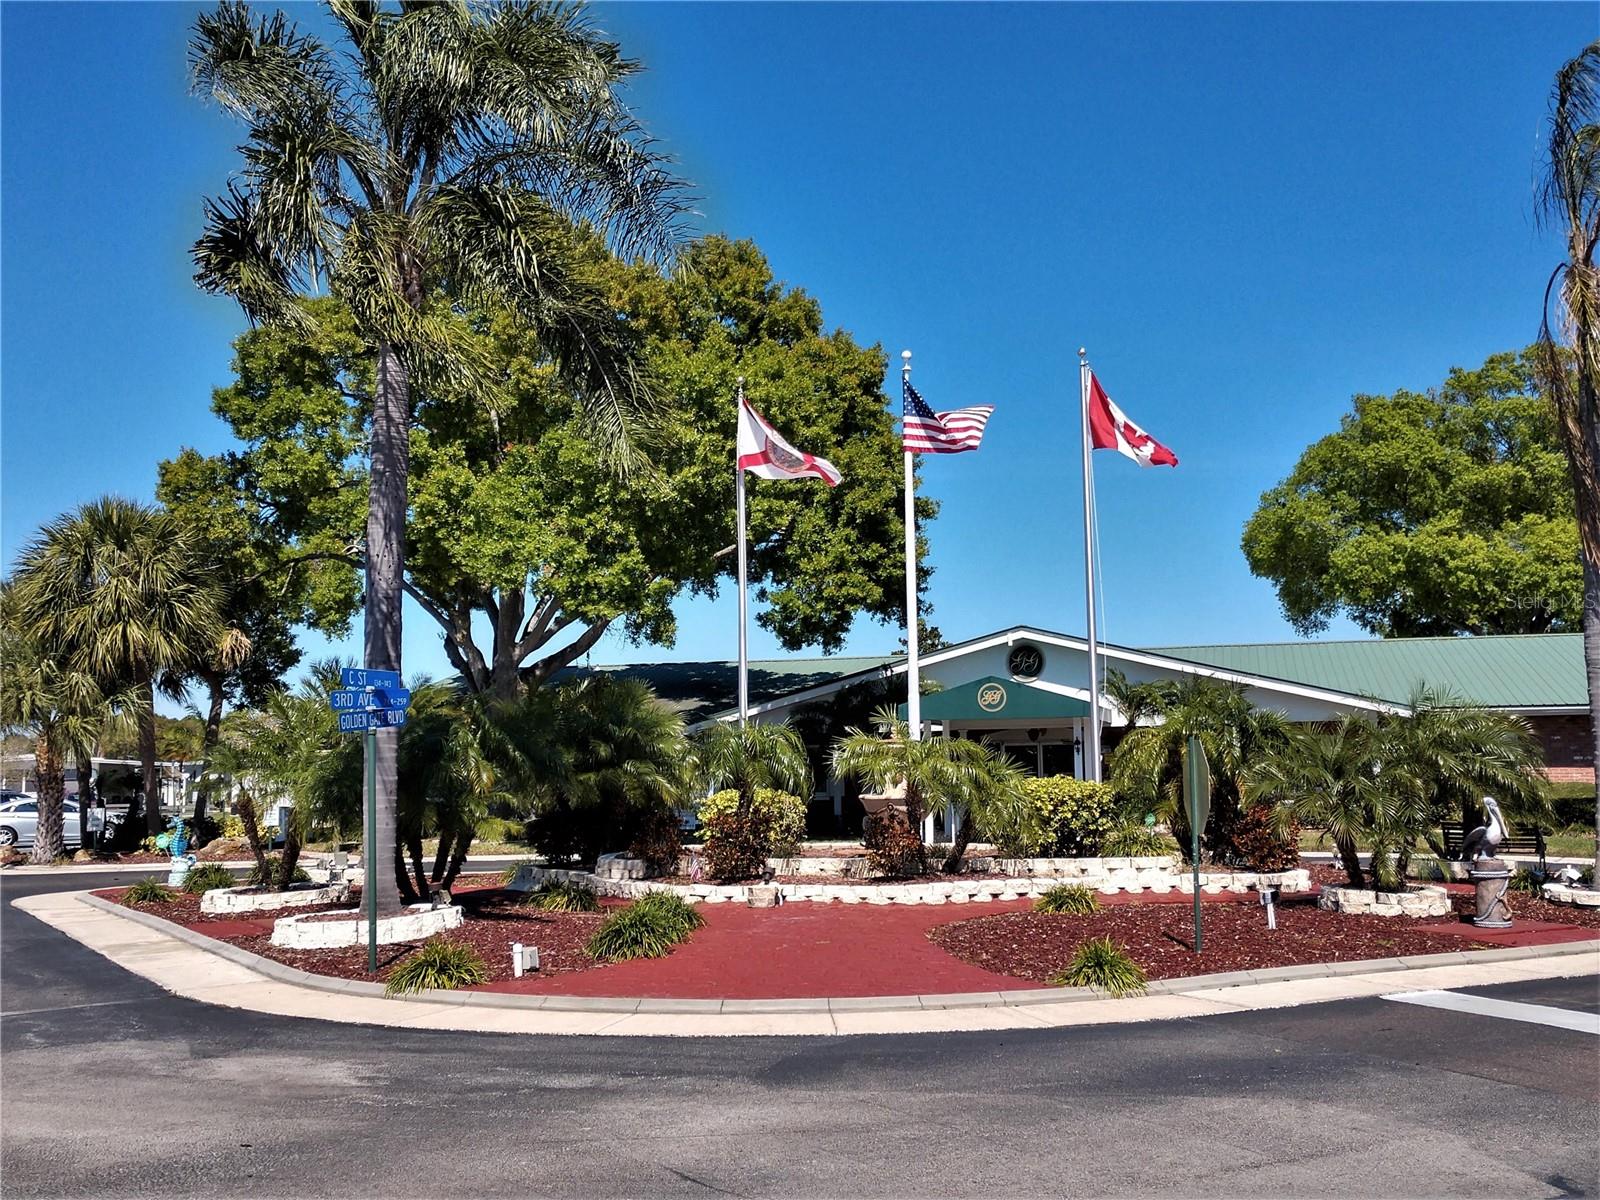 Golden Gate Mobile Home Park is a +55 resident owned cooperative located in the Heart of Tampa Bay. A well-maintained community offering many amenities and activities.